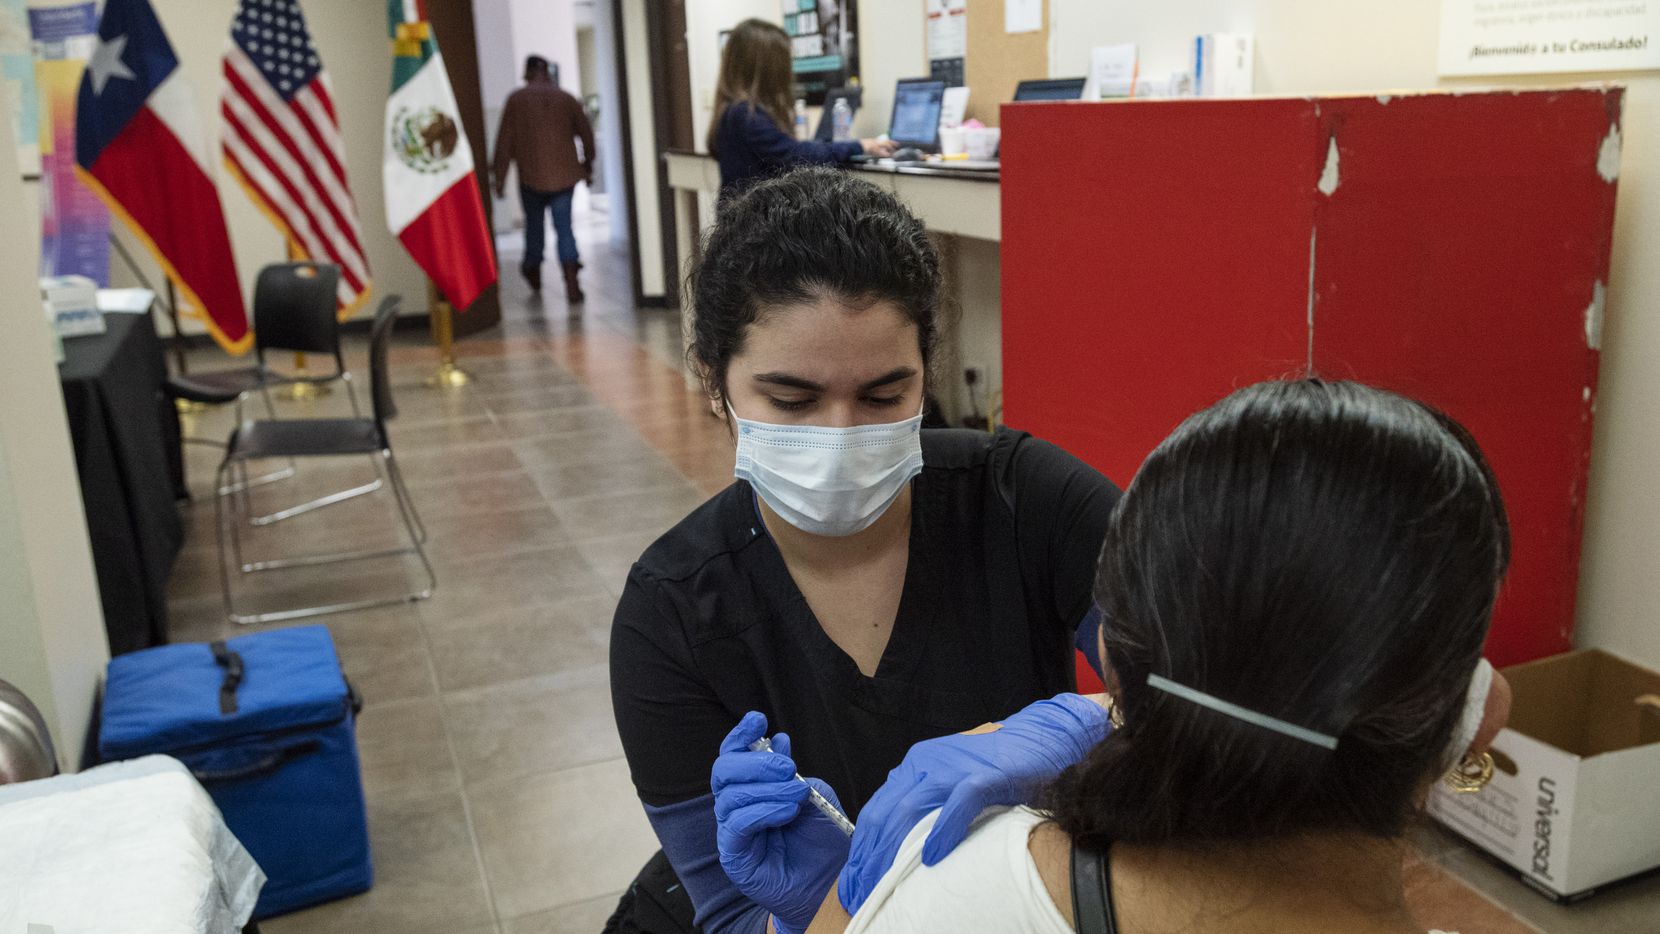 Medical assistant Julia Robles administers a COVID-19 vaccination to a woman at the Mexican Consulate in Dallas, on Saturday, March 27, 2021, in Dallas.